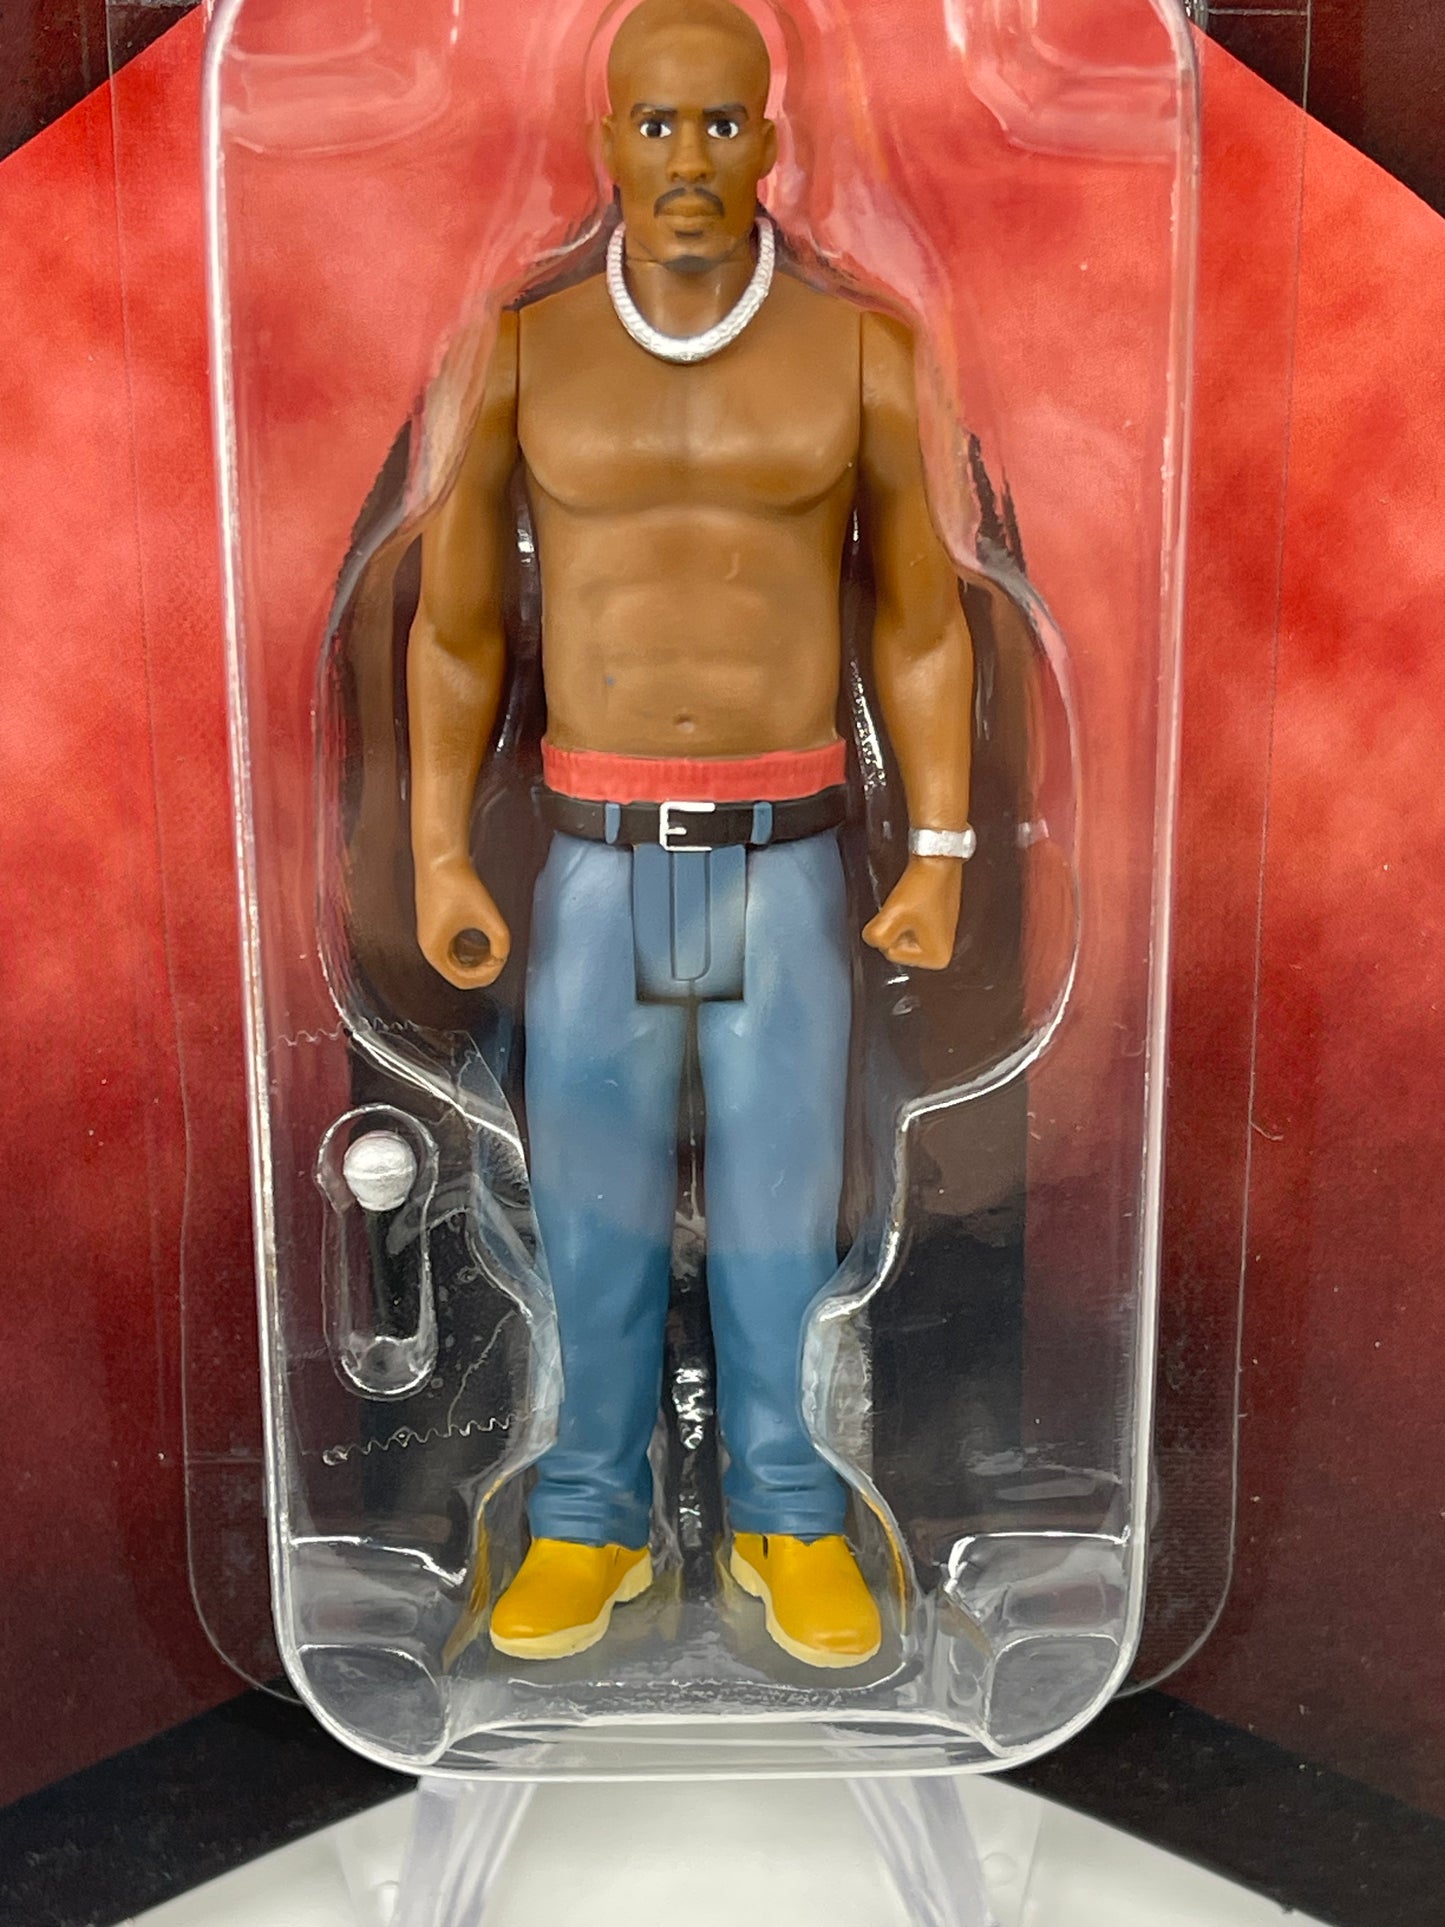 DMX (It's Dark And Hell is Hot) Super7 Reaction Figure - Brand New